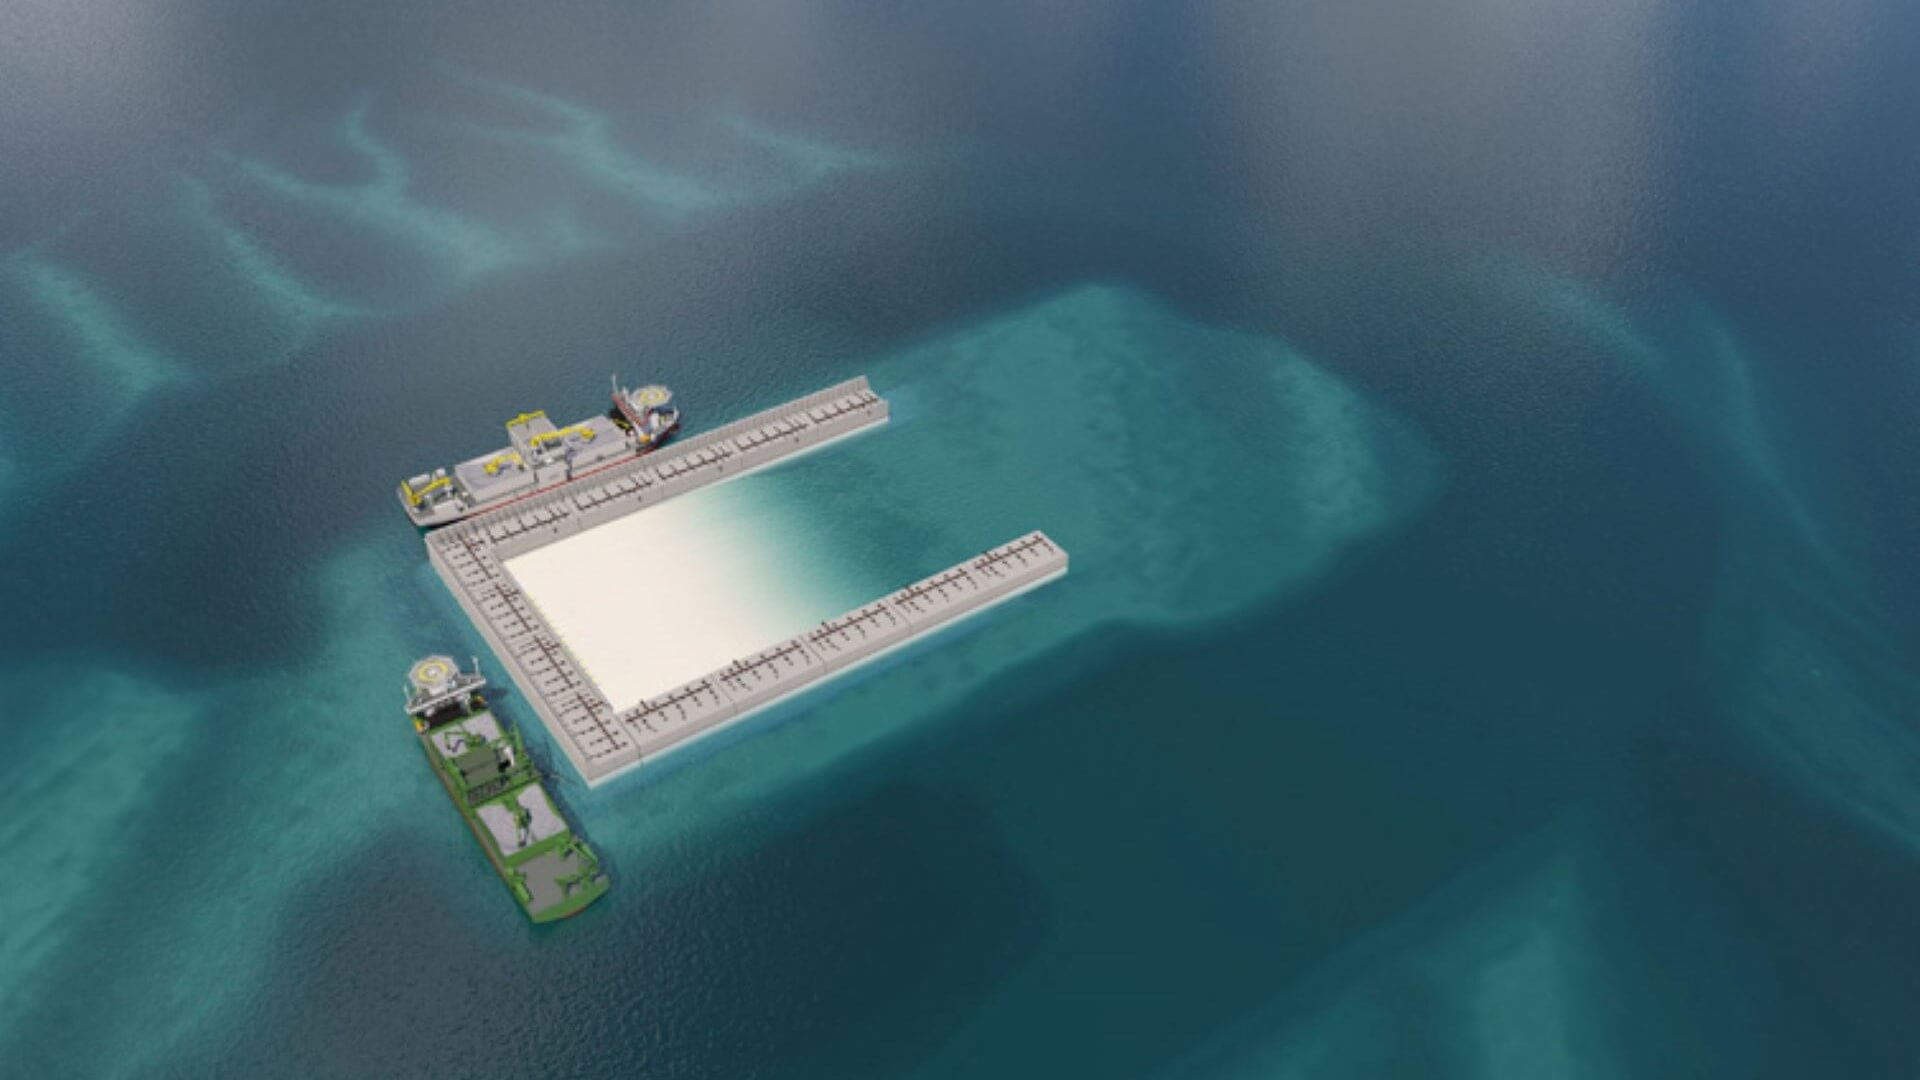 Artist's graphic showing artificial island from above